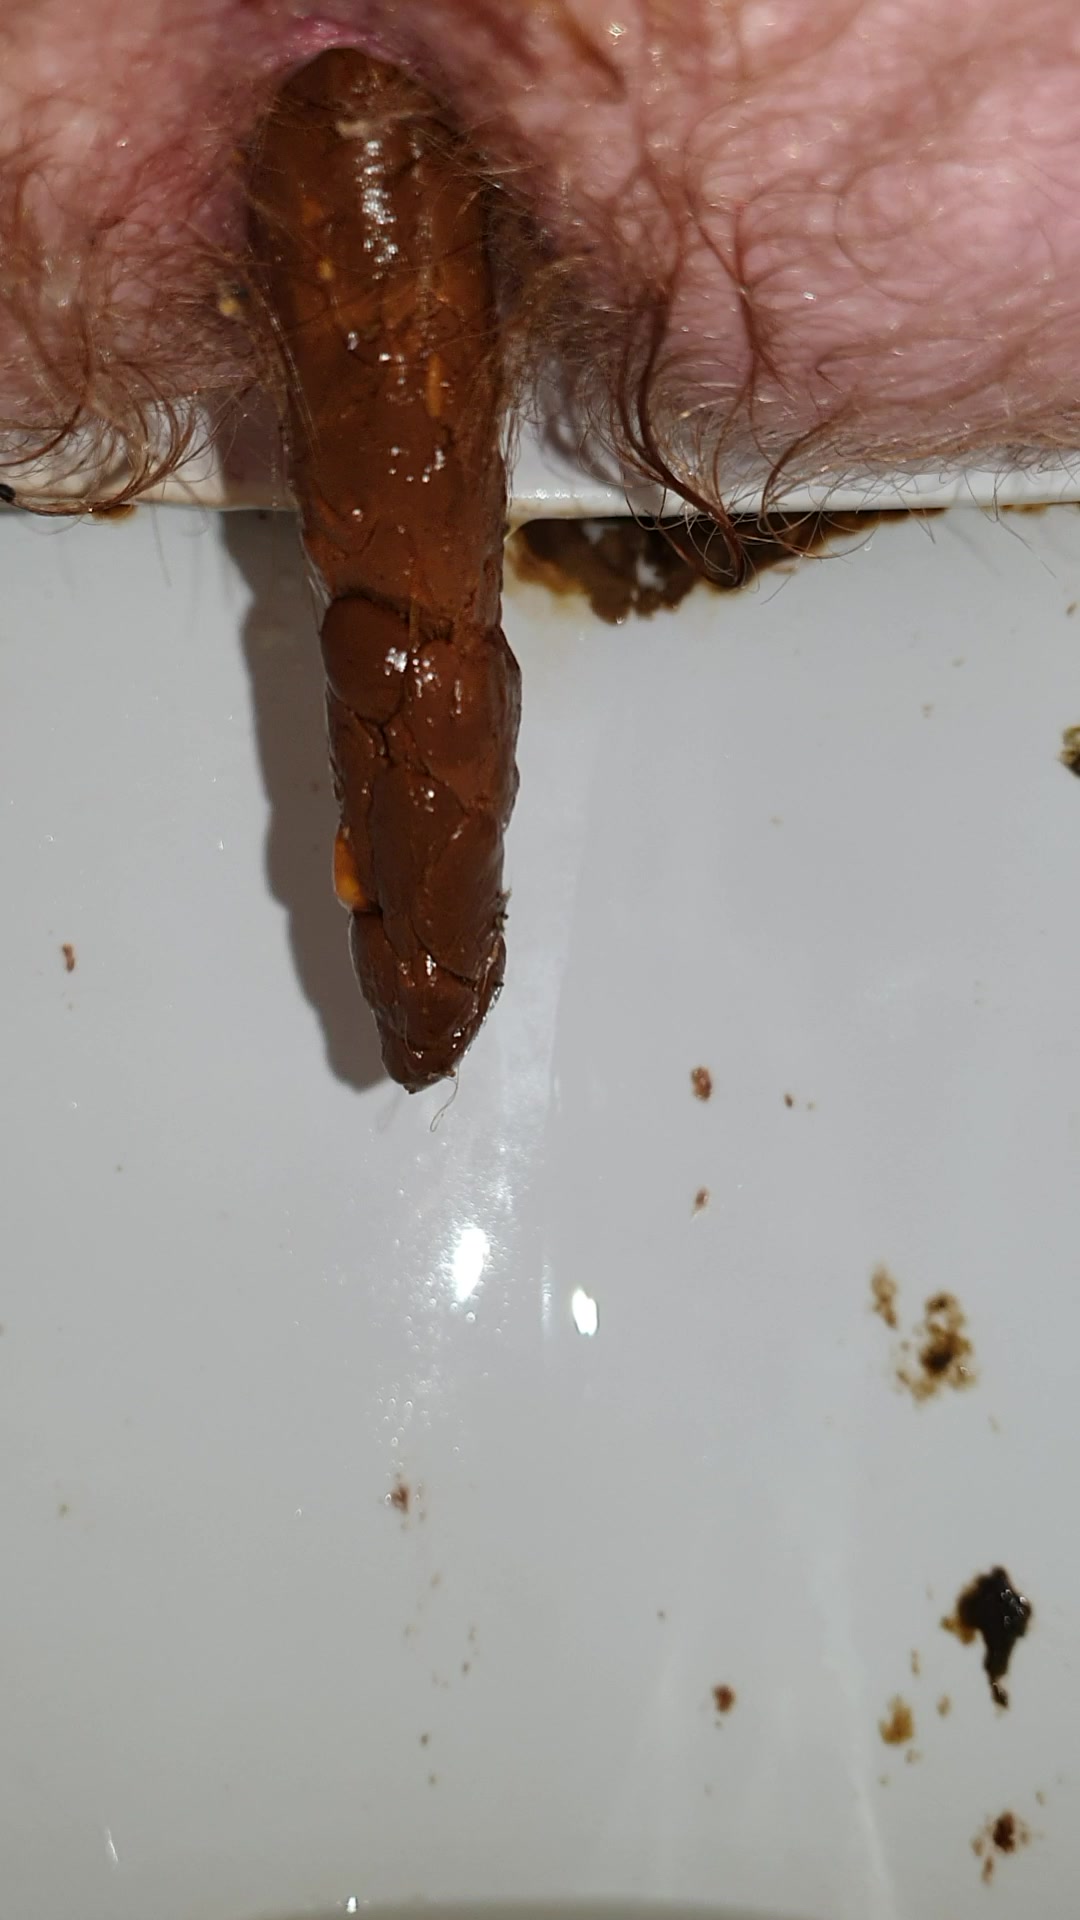 Long poo from a wet arse